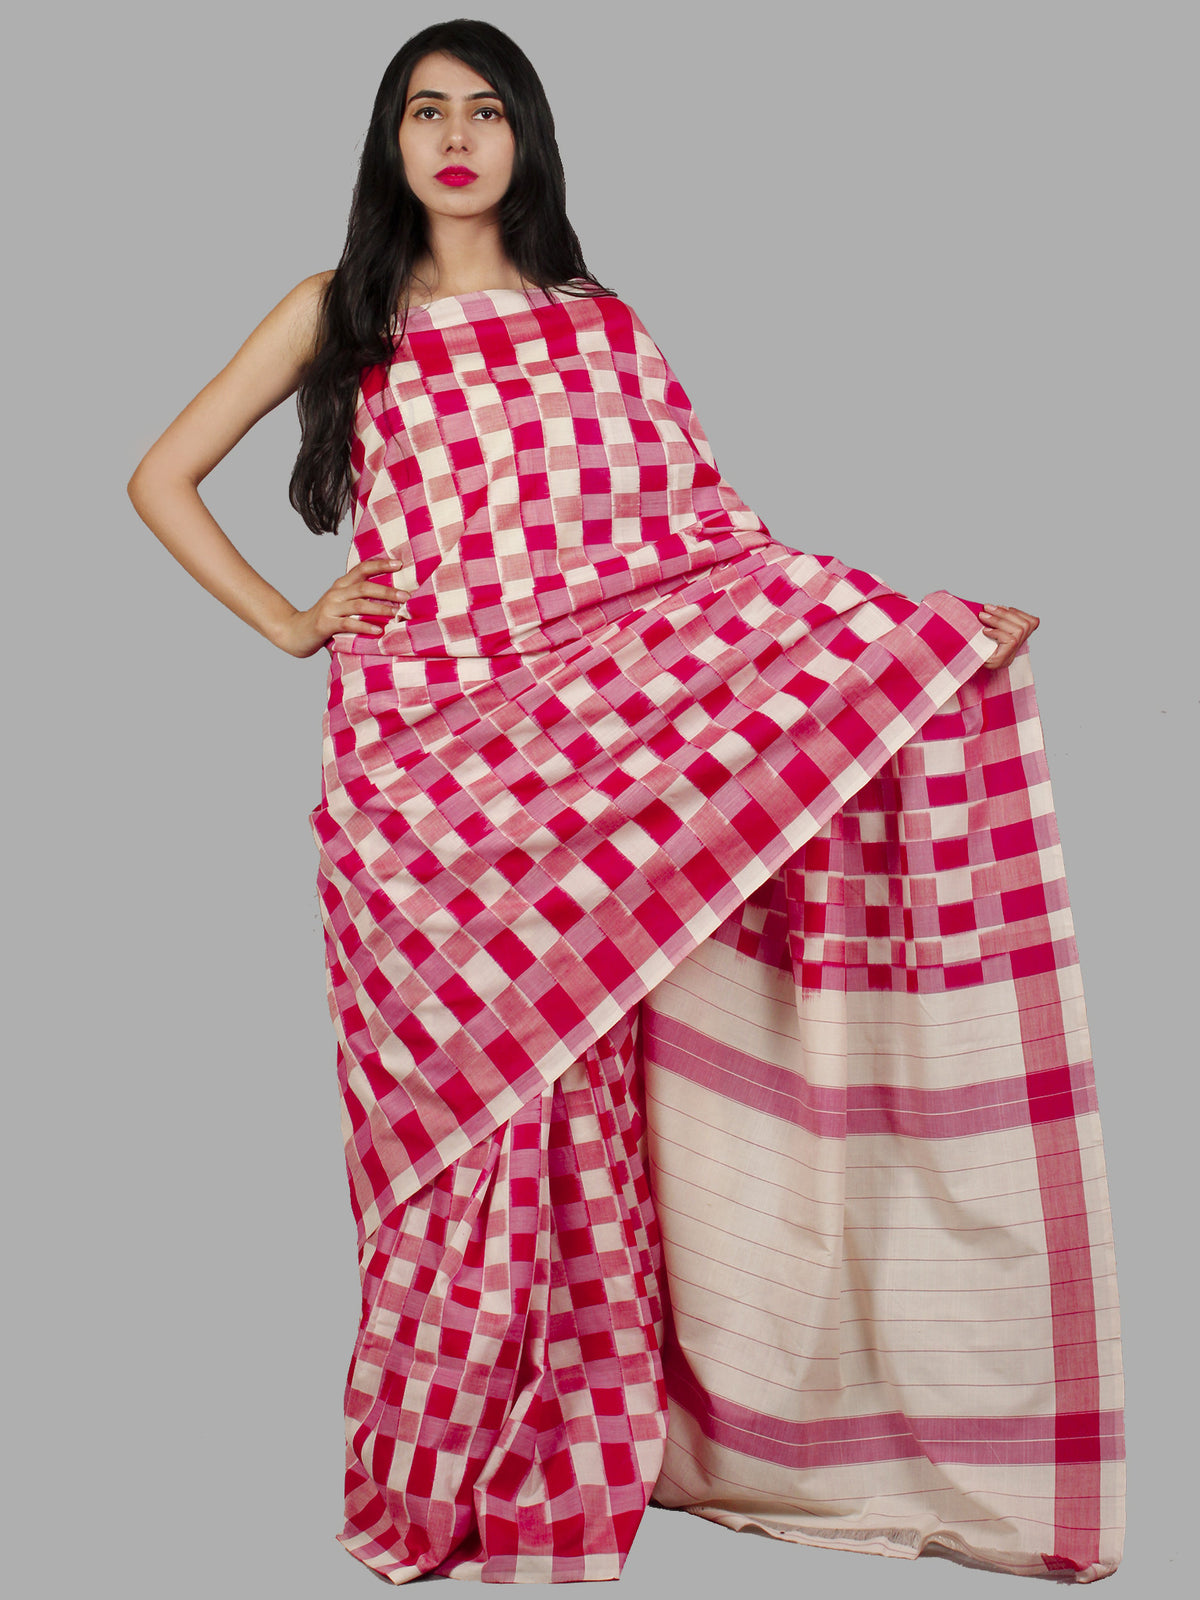 Pink Red Ivory Double Ikat Handwoven Pochampally Mercerized Cotton Saree - S031701465